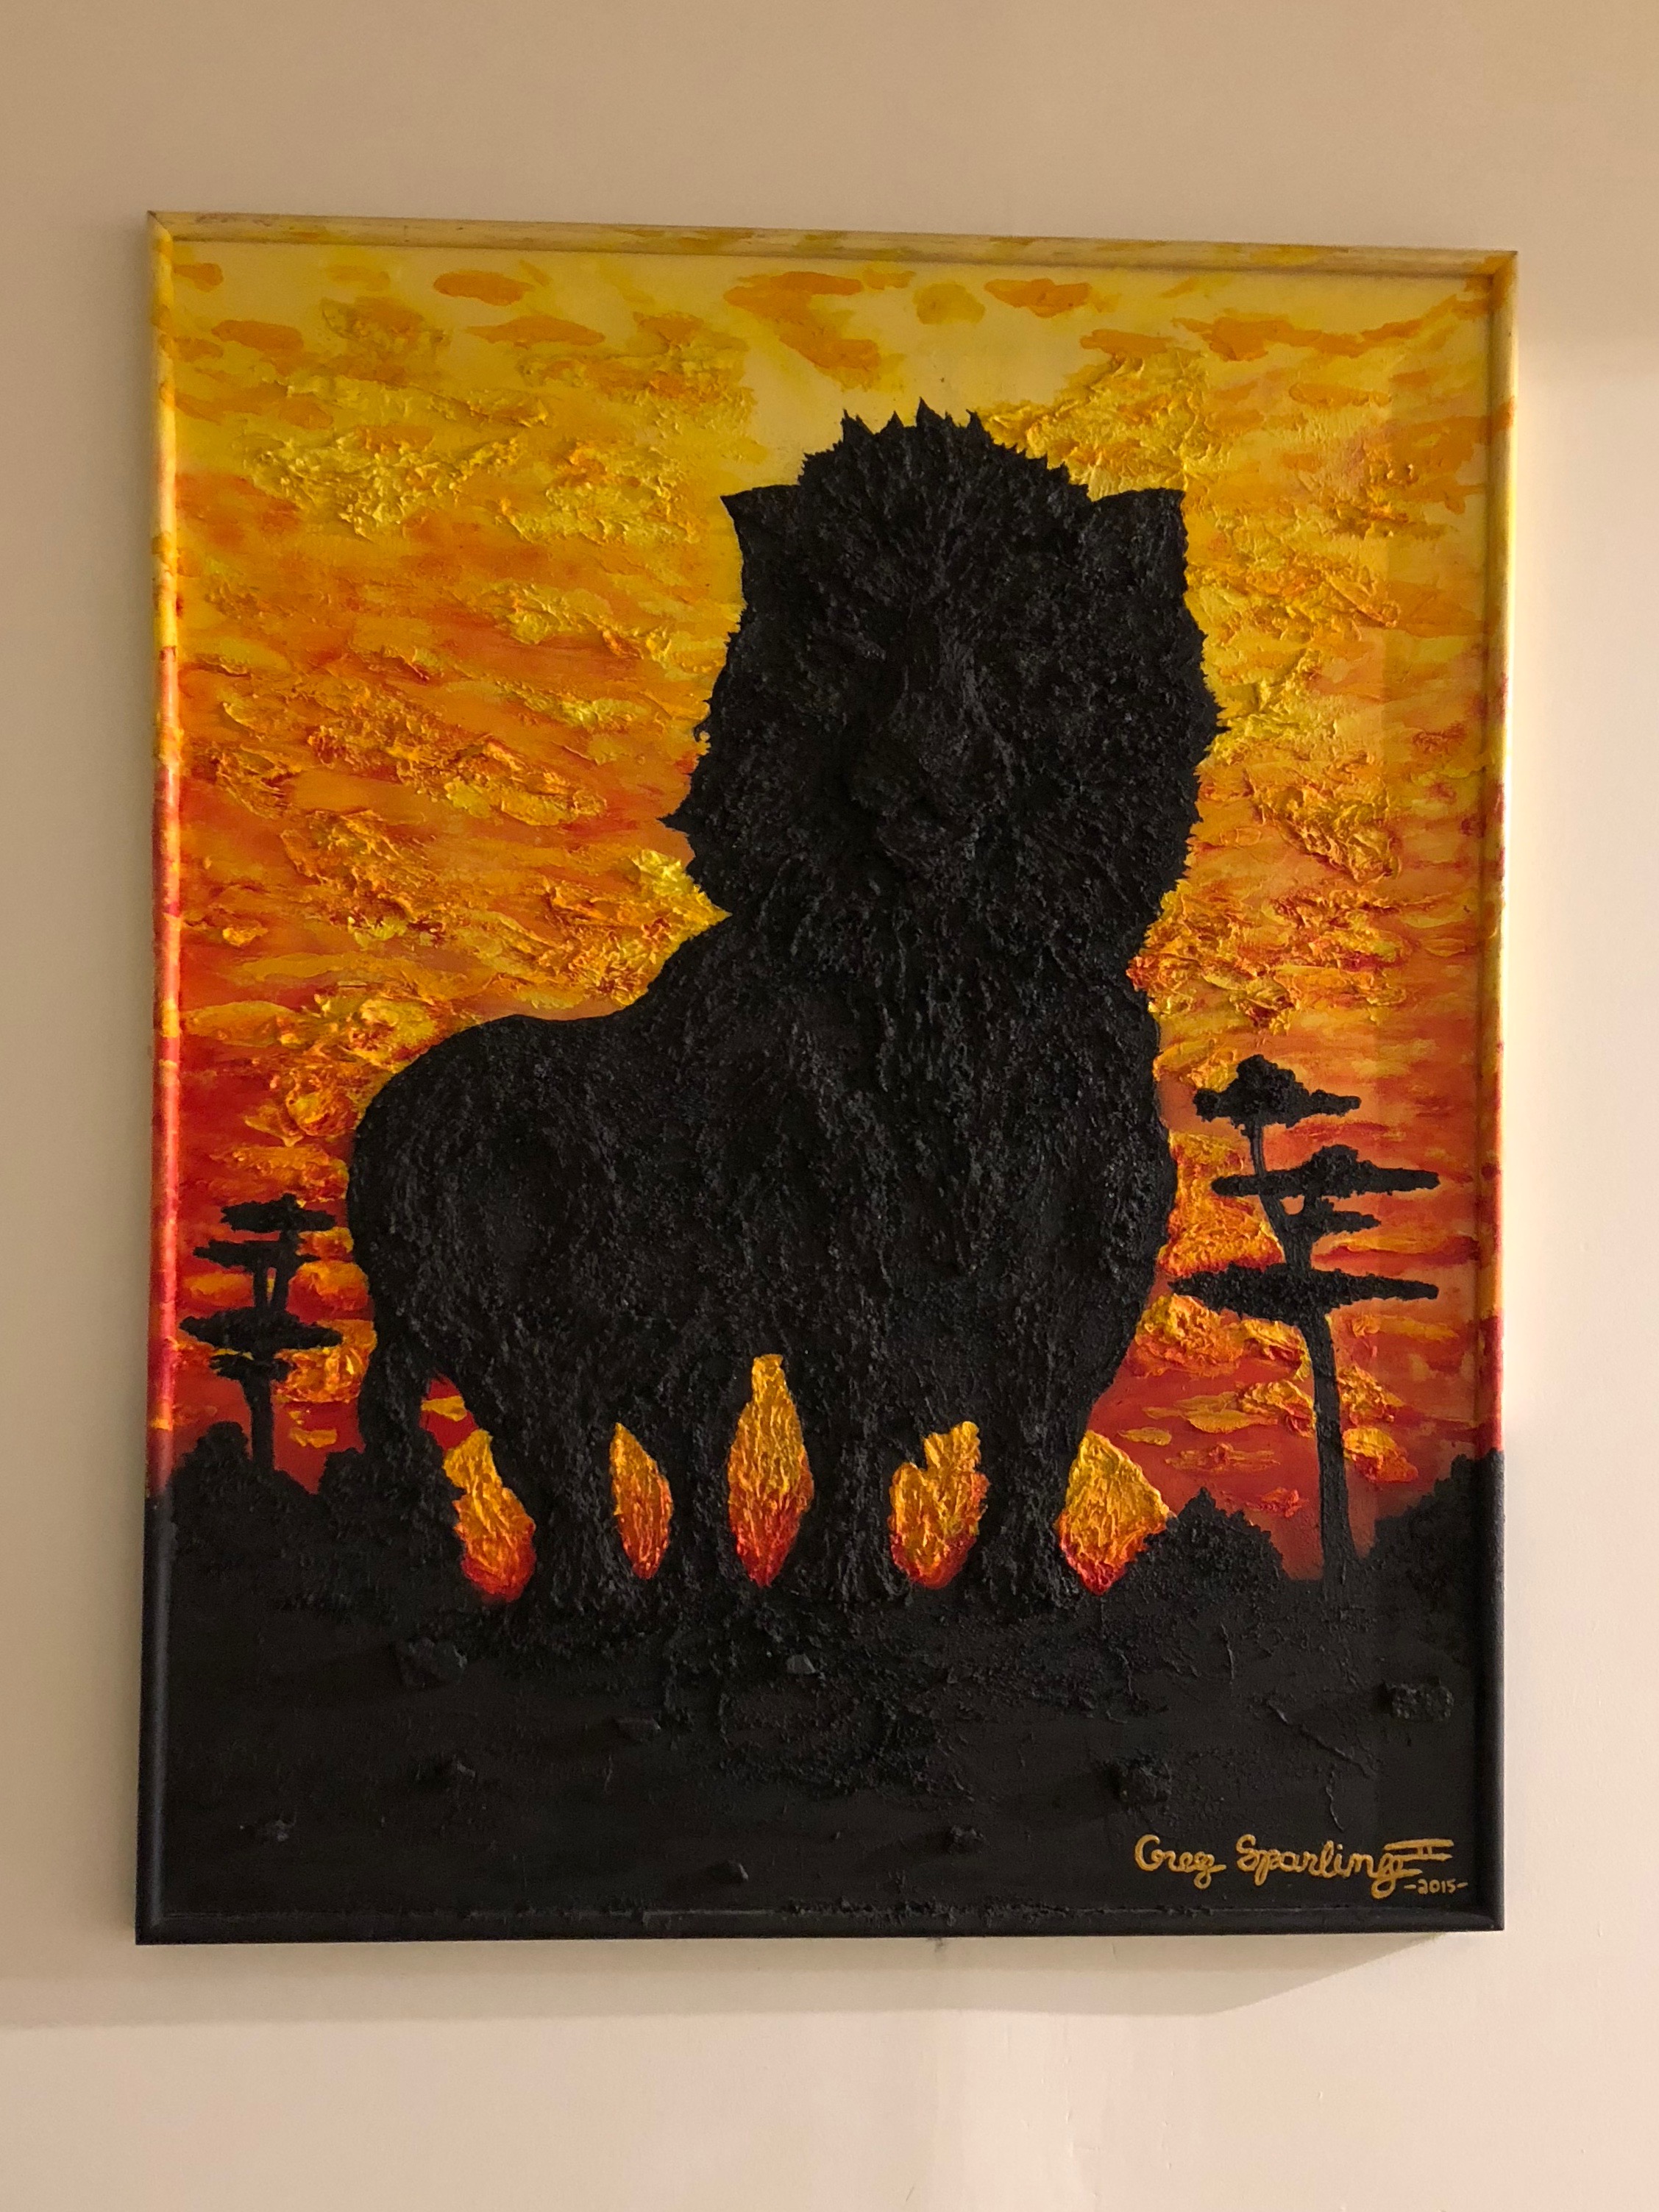 A textured painting of a lion at sunset, by Greg Sparling, hangs on a wall at the Midwestern African Museum of Art. (Photo by Katie Knight)